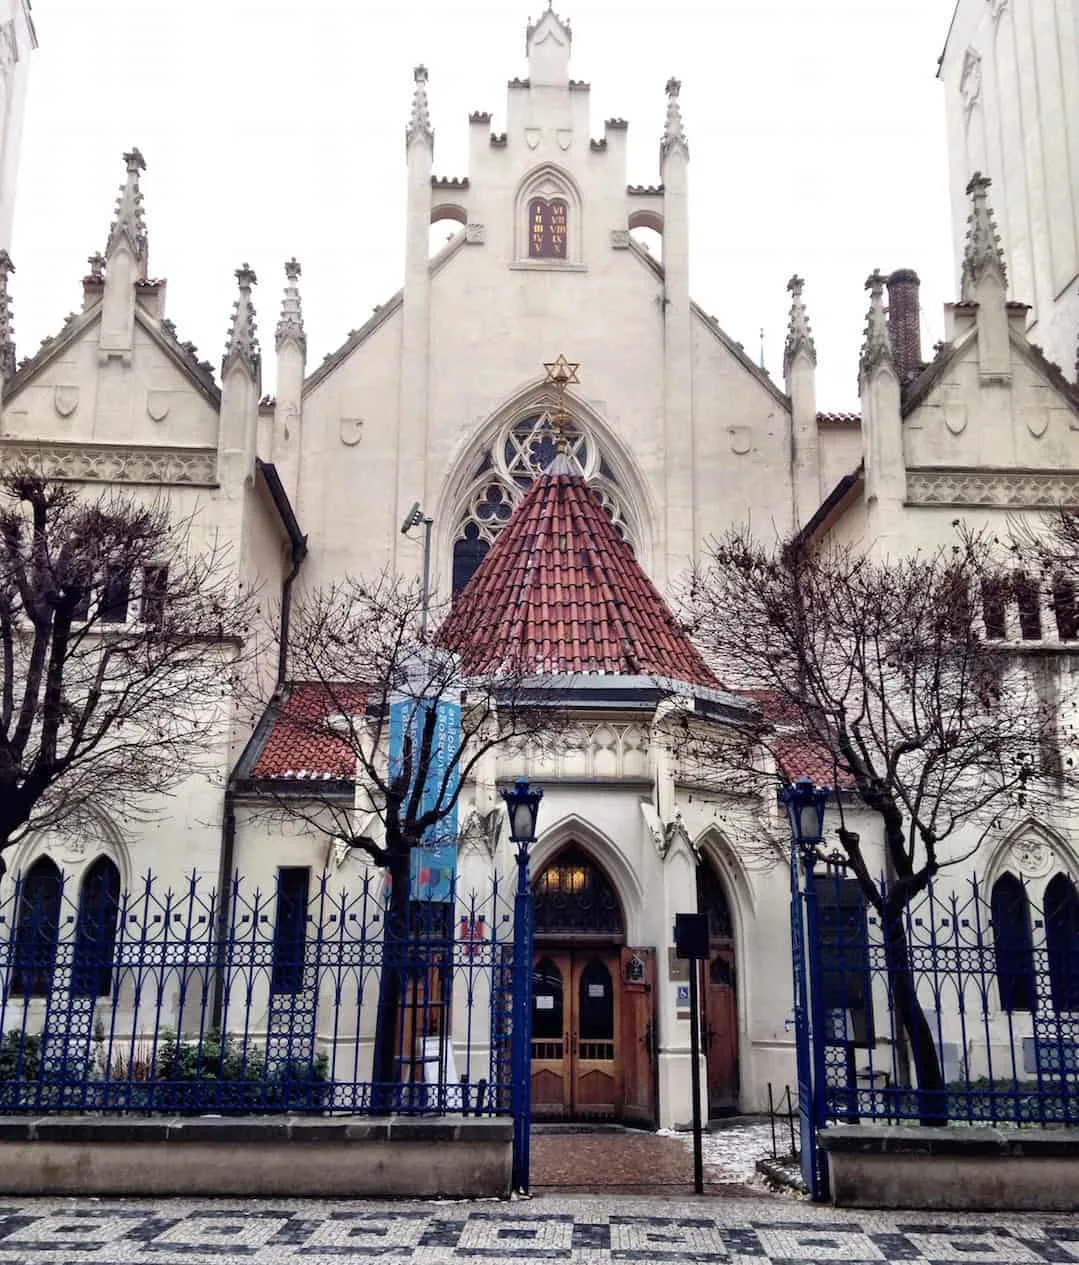 Prague First Timers Guide: Old Synagogue - Things to do in Prague, what not to miss for first timers traveling to Prague, #travel #travelblogger #Prague #Europe #CzechRepublic #Czechia